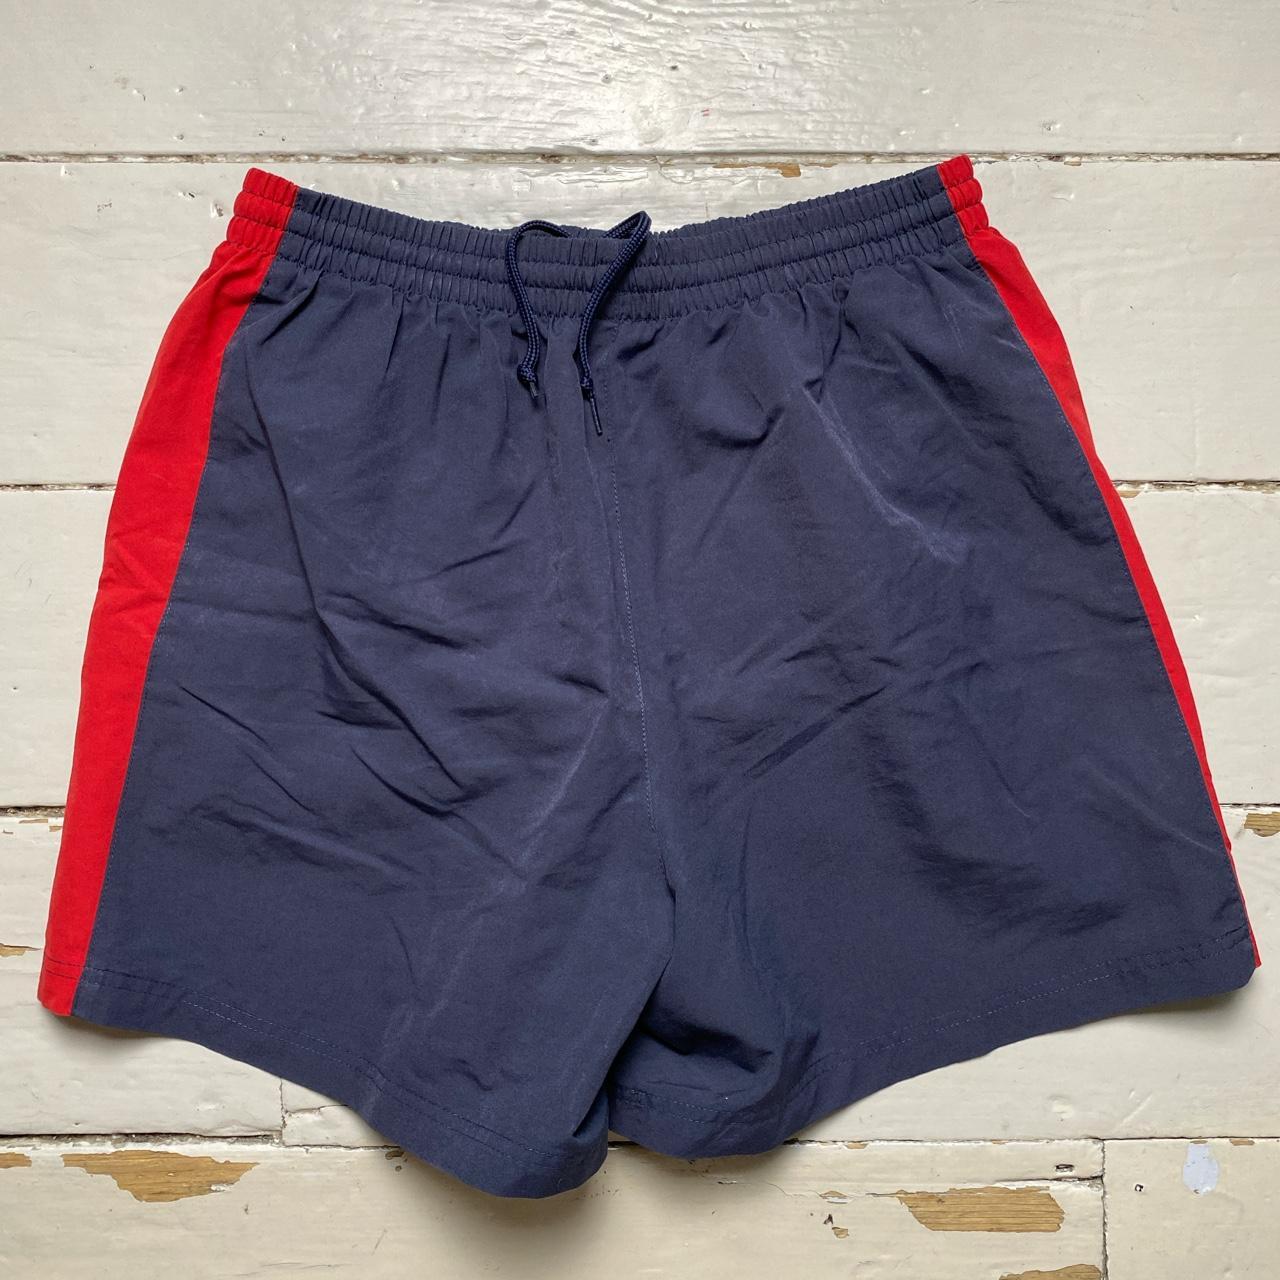 Umbro Navy and Red Shell Track Pant Shorts